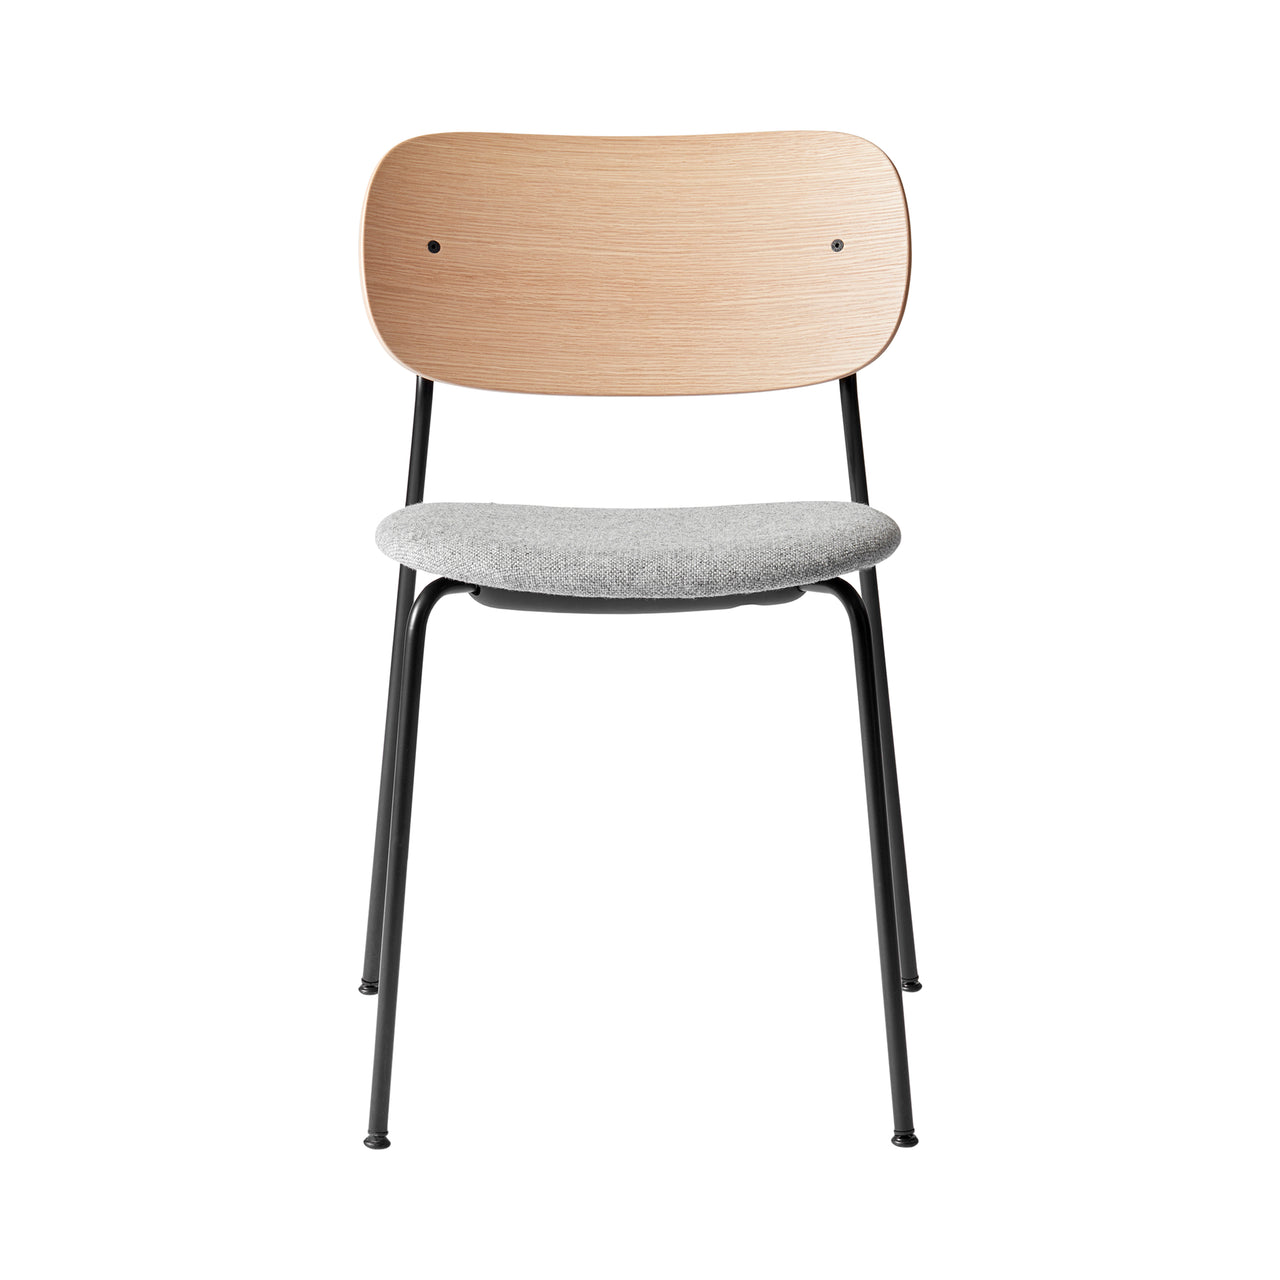 Co Chair: Seat Upholstered + Black + Natural Oak